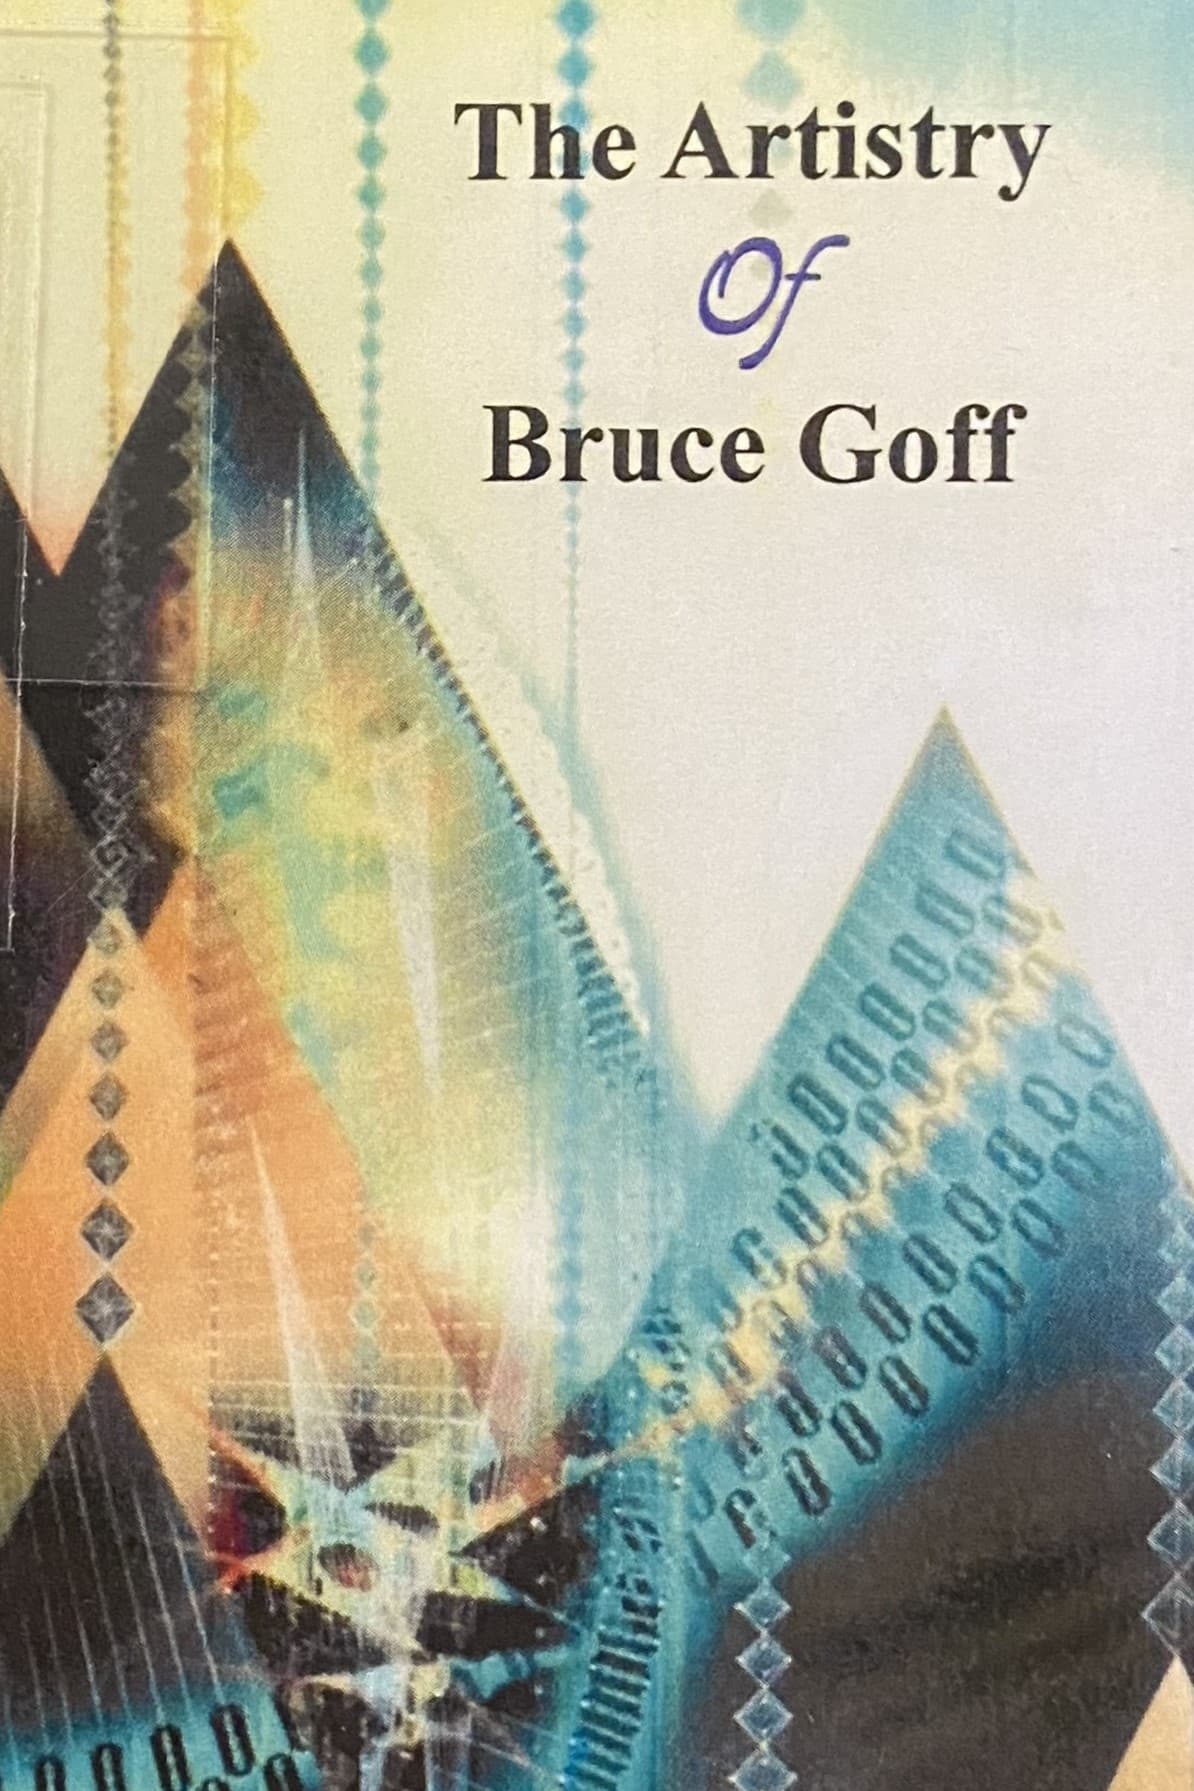 The Artistry of Bruce Goff